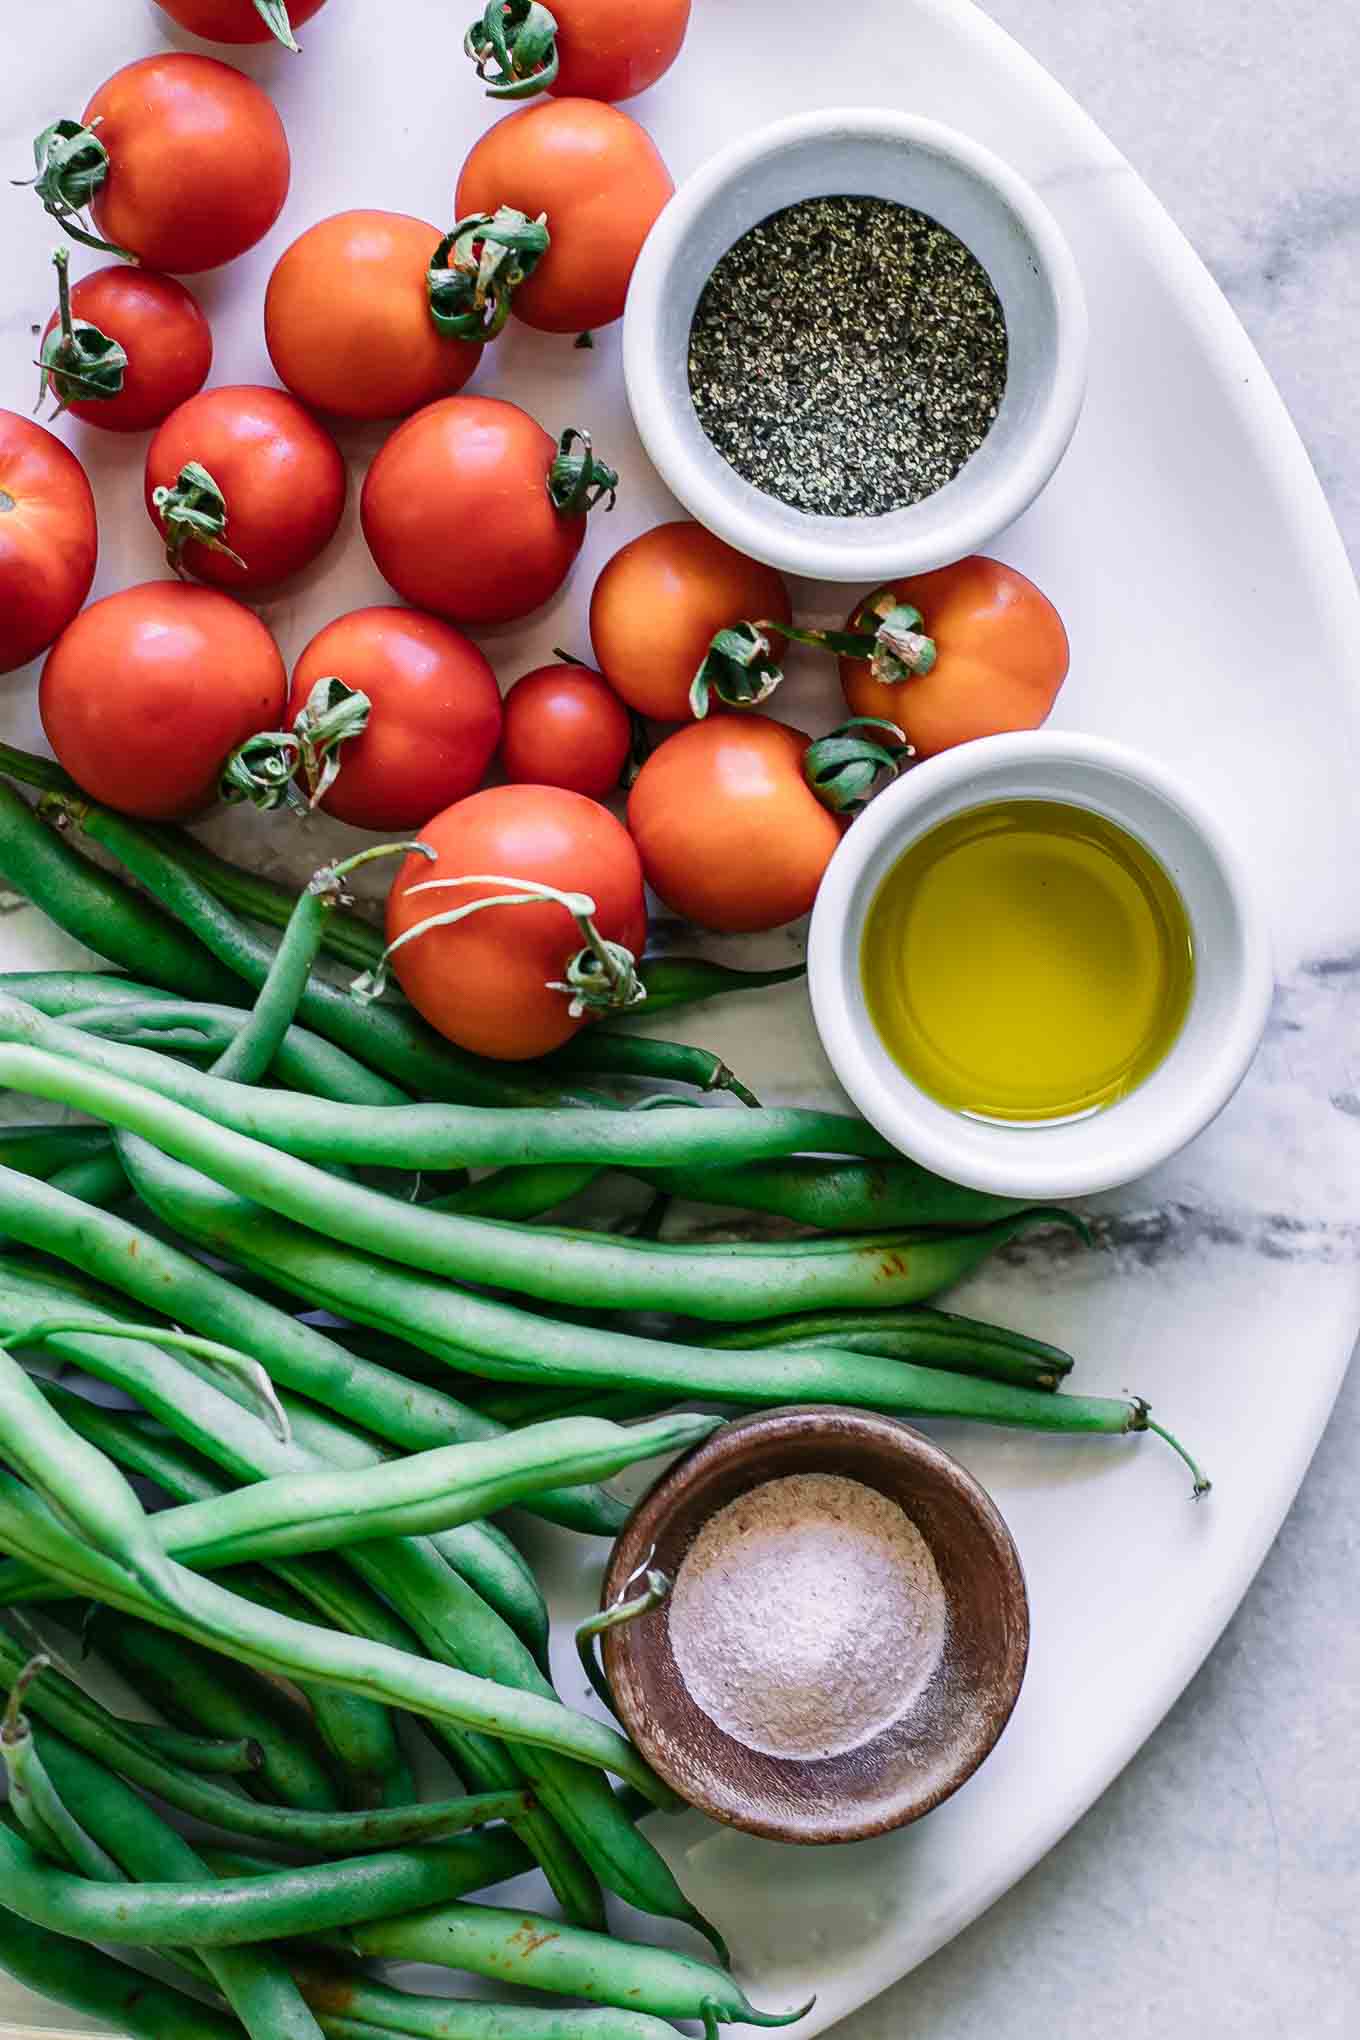 fresh green beans and tomatoes on a white plate with bowls of olive oil, salt, pepper, and garlic